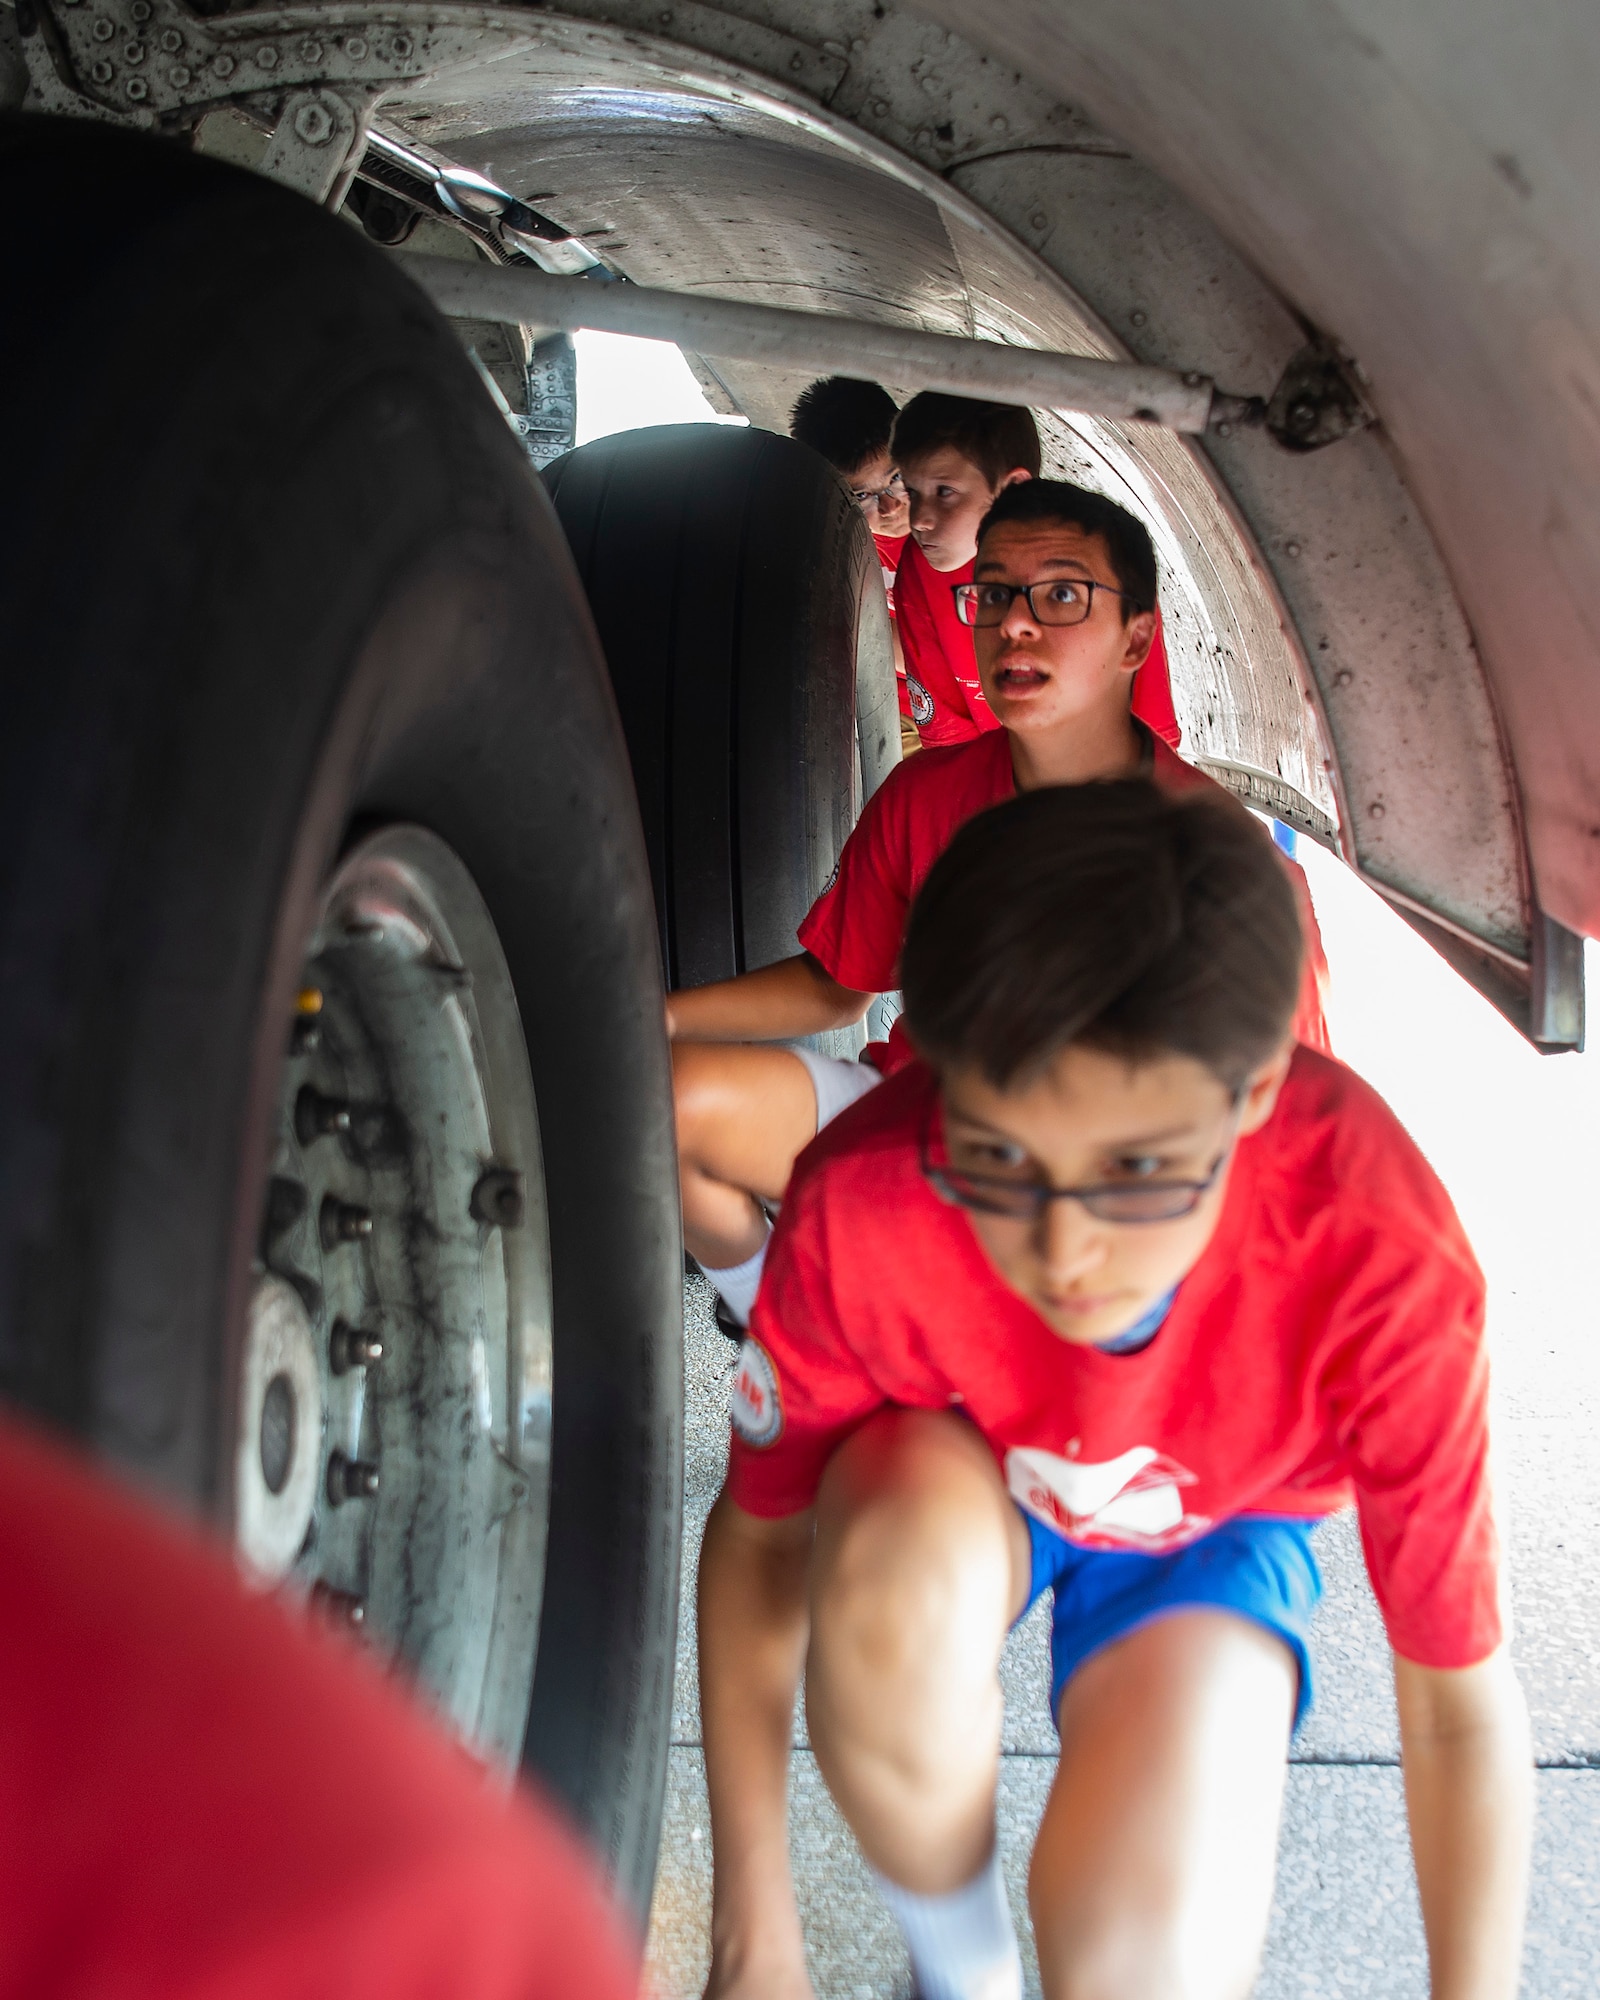 Air Camp participants get an up-close look at a C-17 Globemaster III aircraft’s landing gear and wheel well during a visit to Wright-Patterson Air Force Base, Ohio, on June 14, 2021. Air Camp is a STEM program aimed at promoting interest in aviation among middle school students. (U.S. Air Force photo by R.J. Oriez)